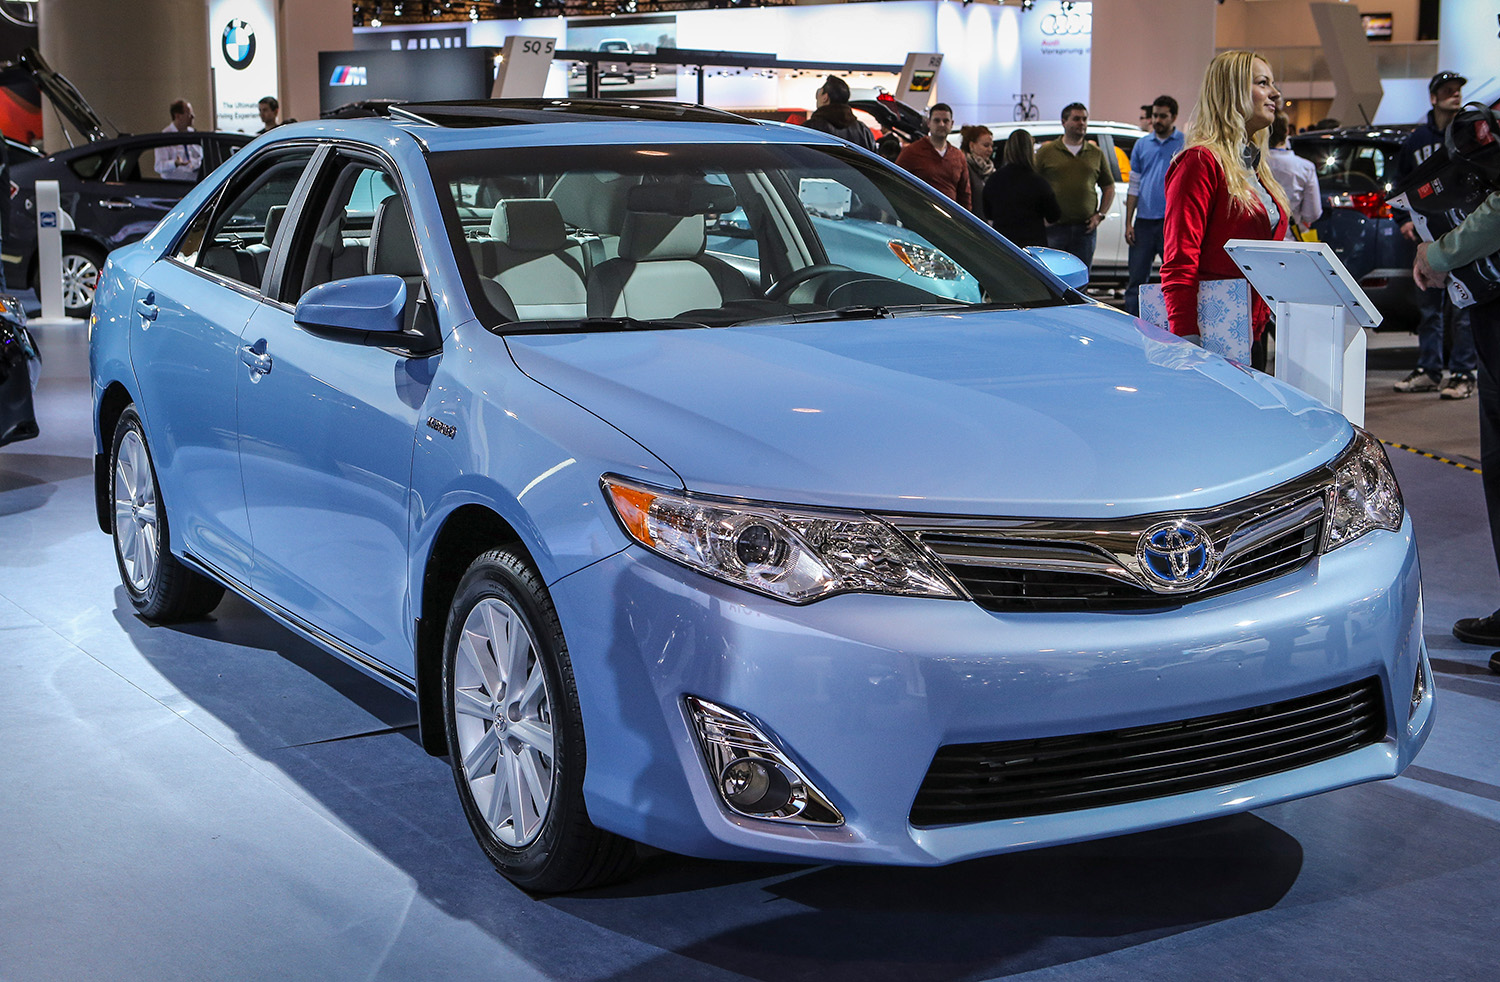 2013 Toyota Camry Hybrid in blue on display at CIAS 2013 Canadian International AutoShow